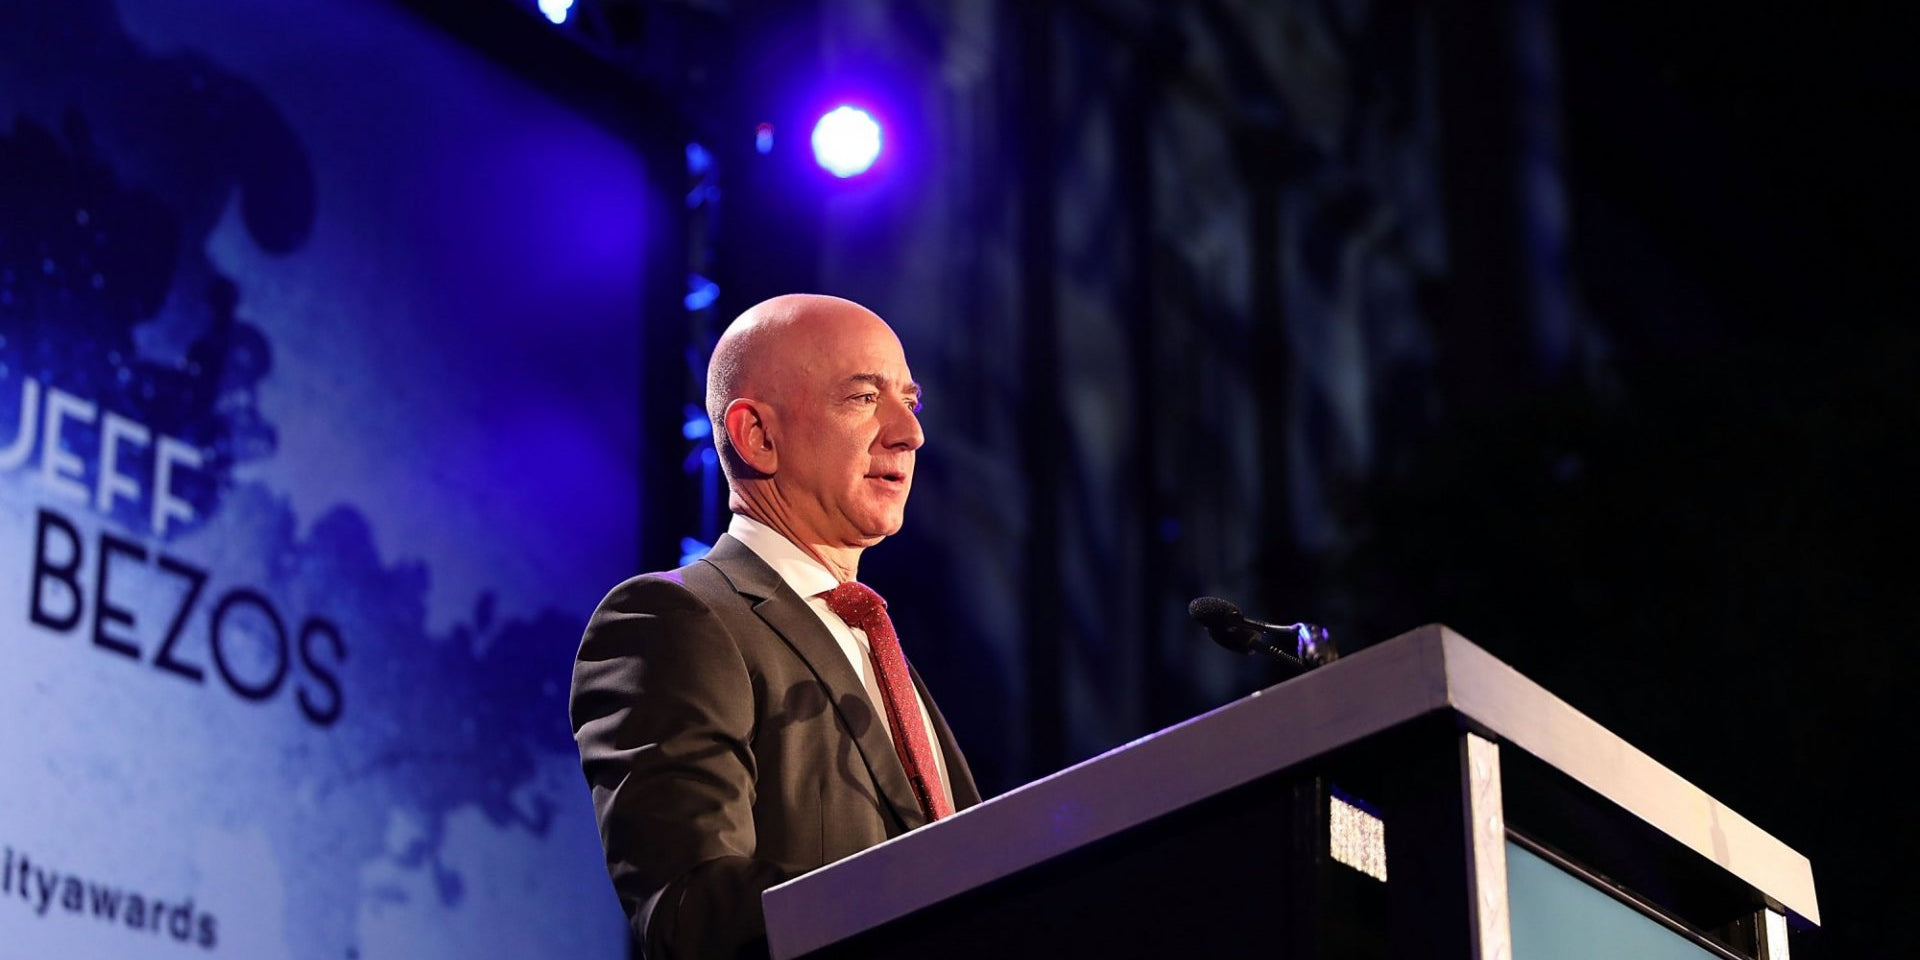 7 Lessons for Entrepreneurs from Amazon Founder Jeff Bezos